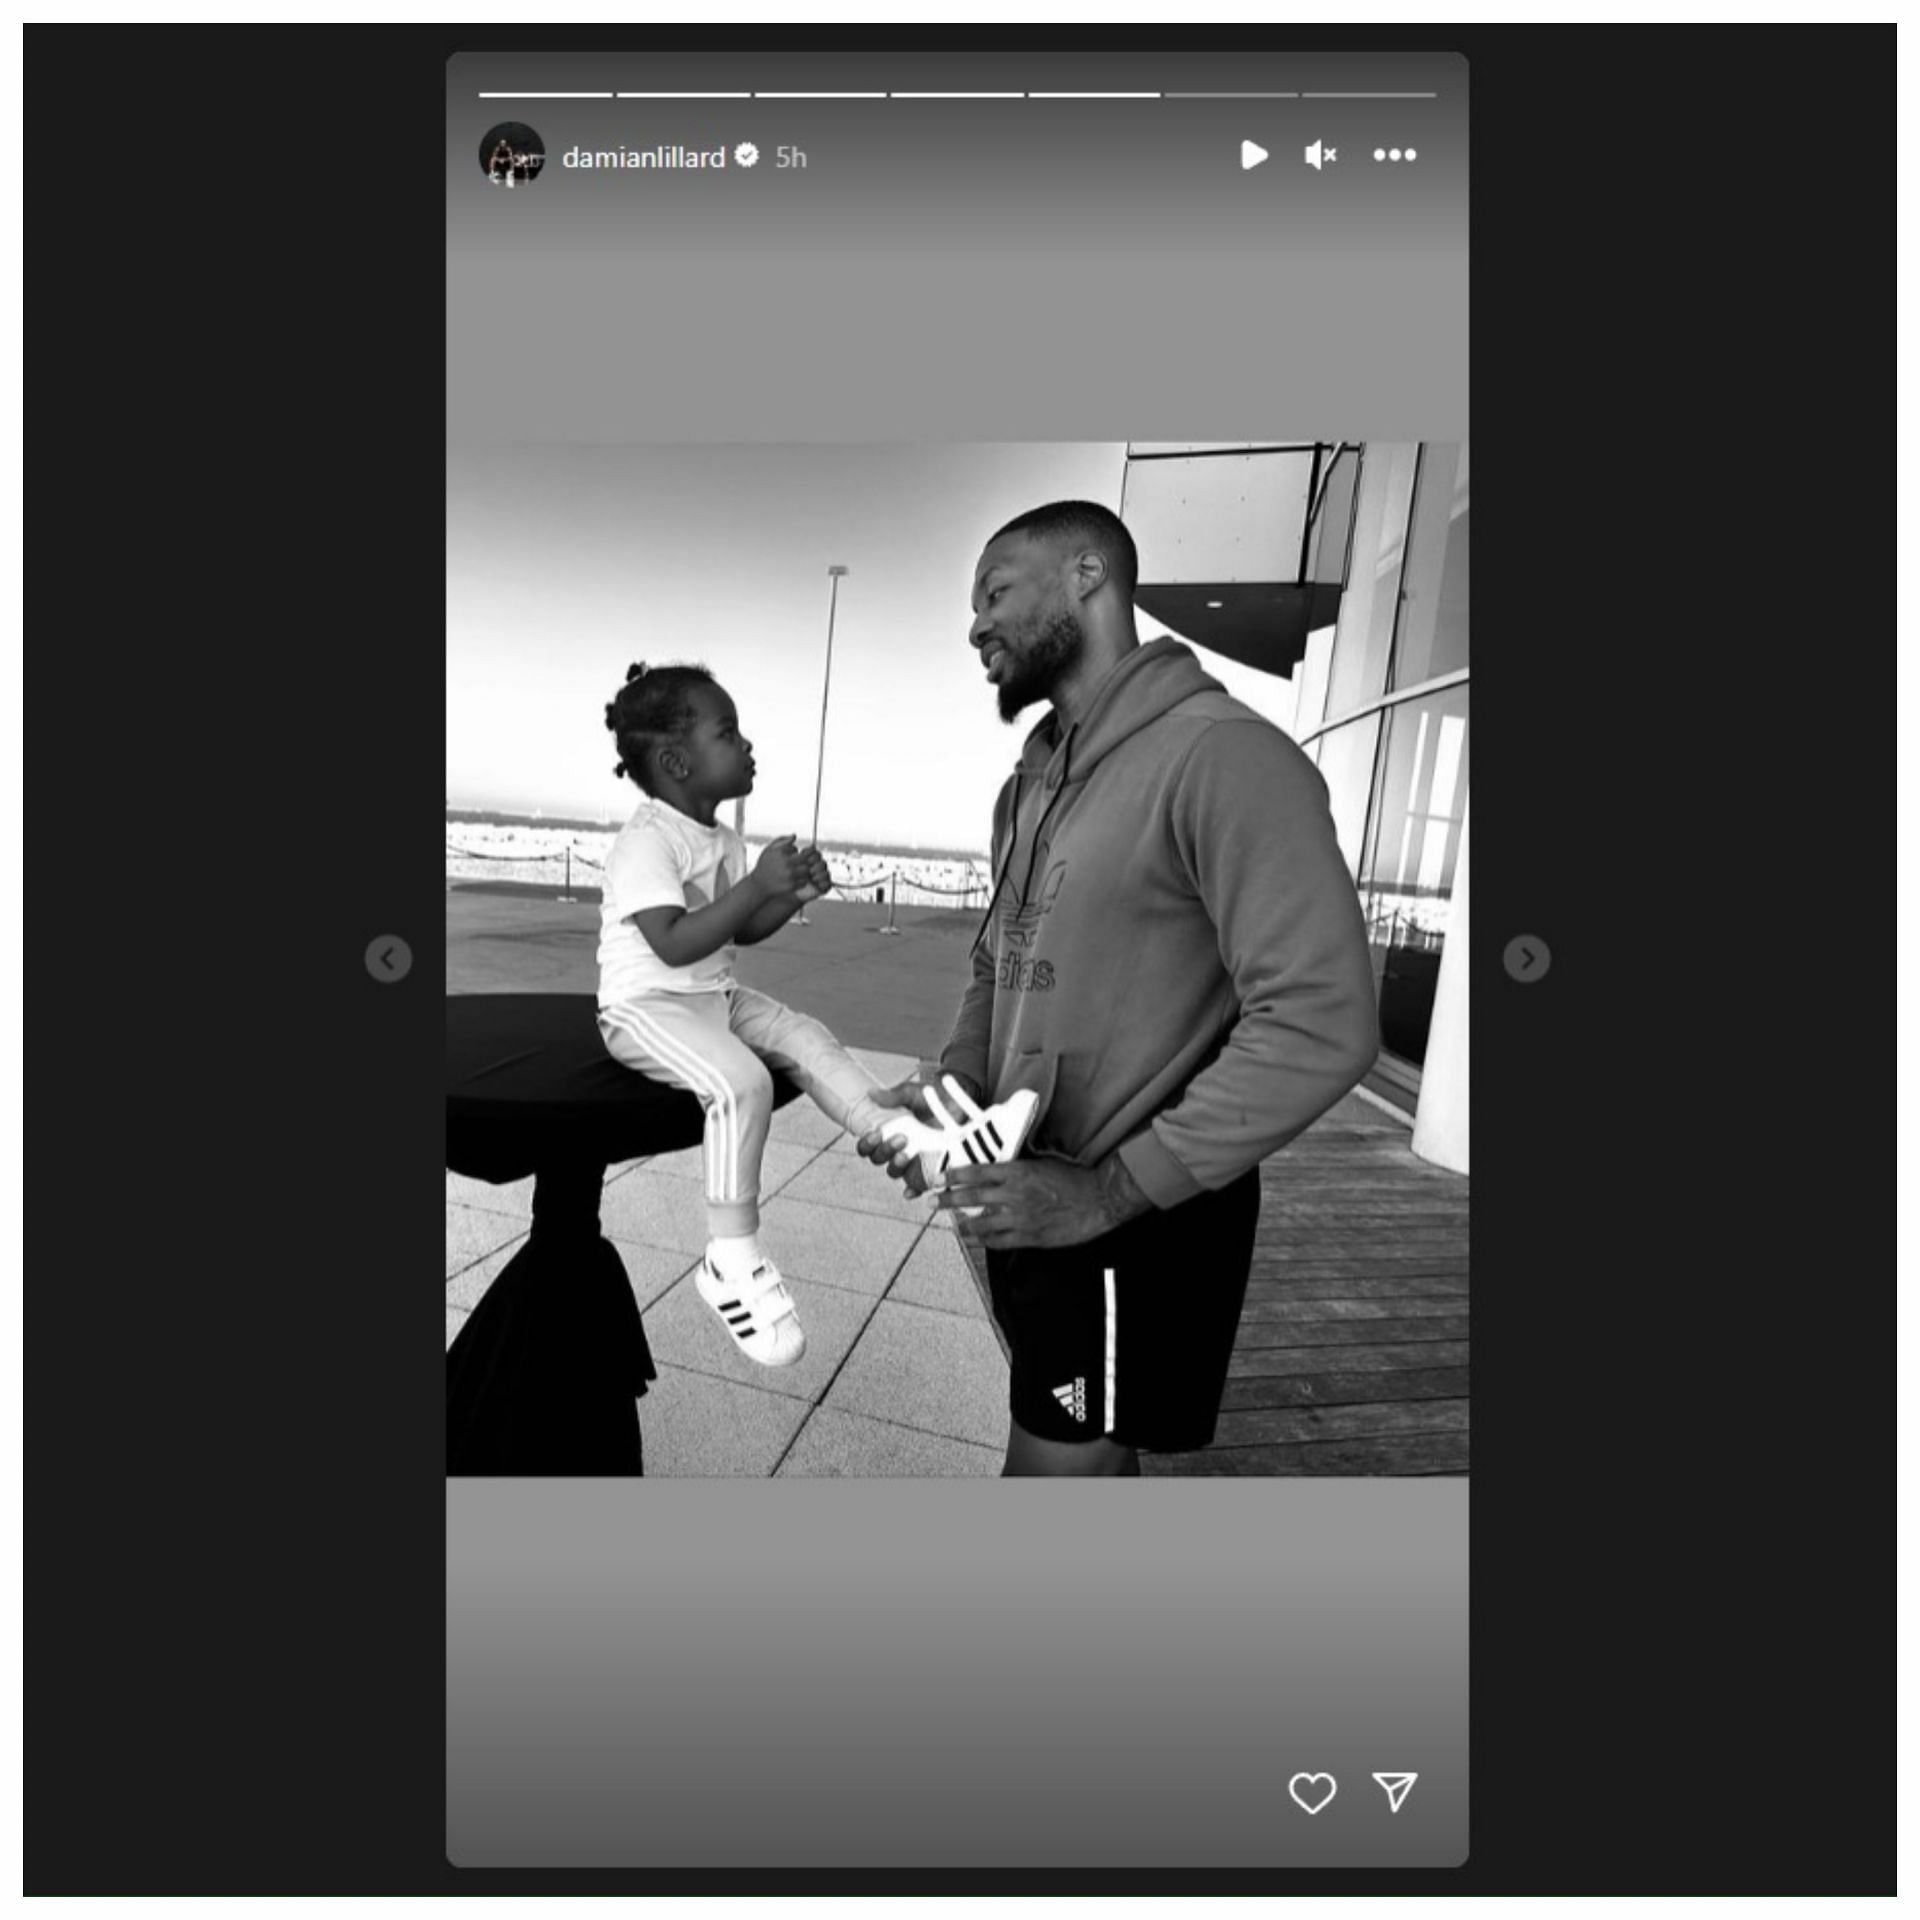 Lillard spends time with his kids